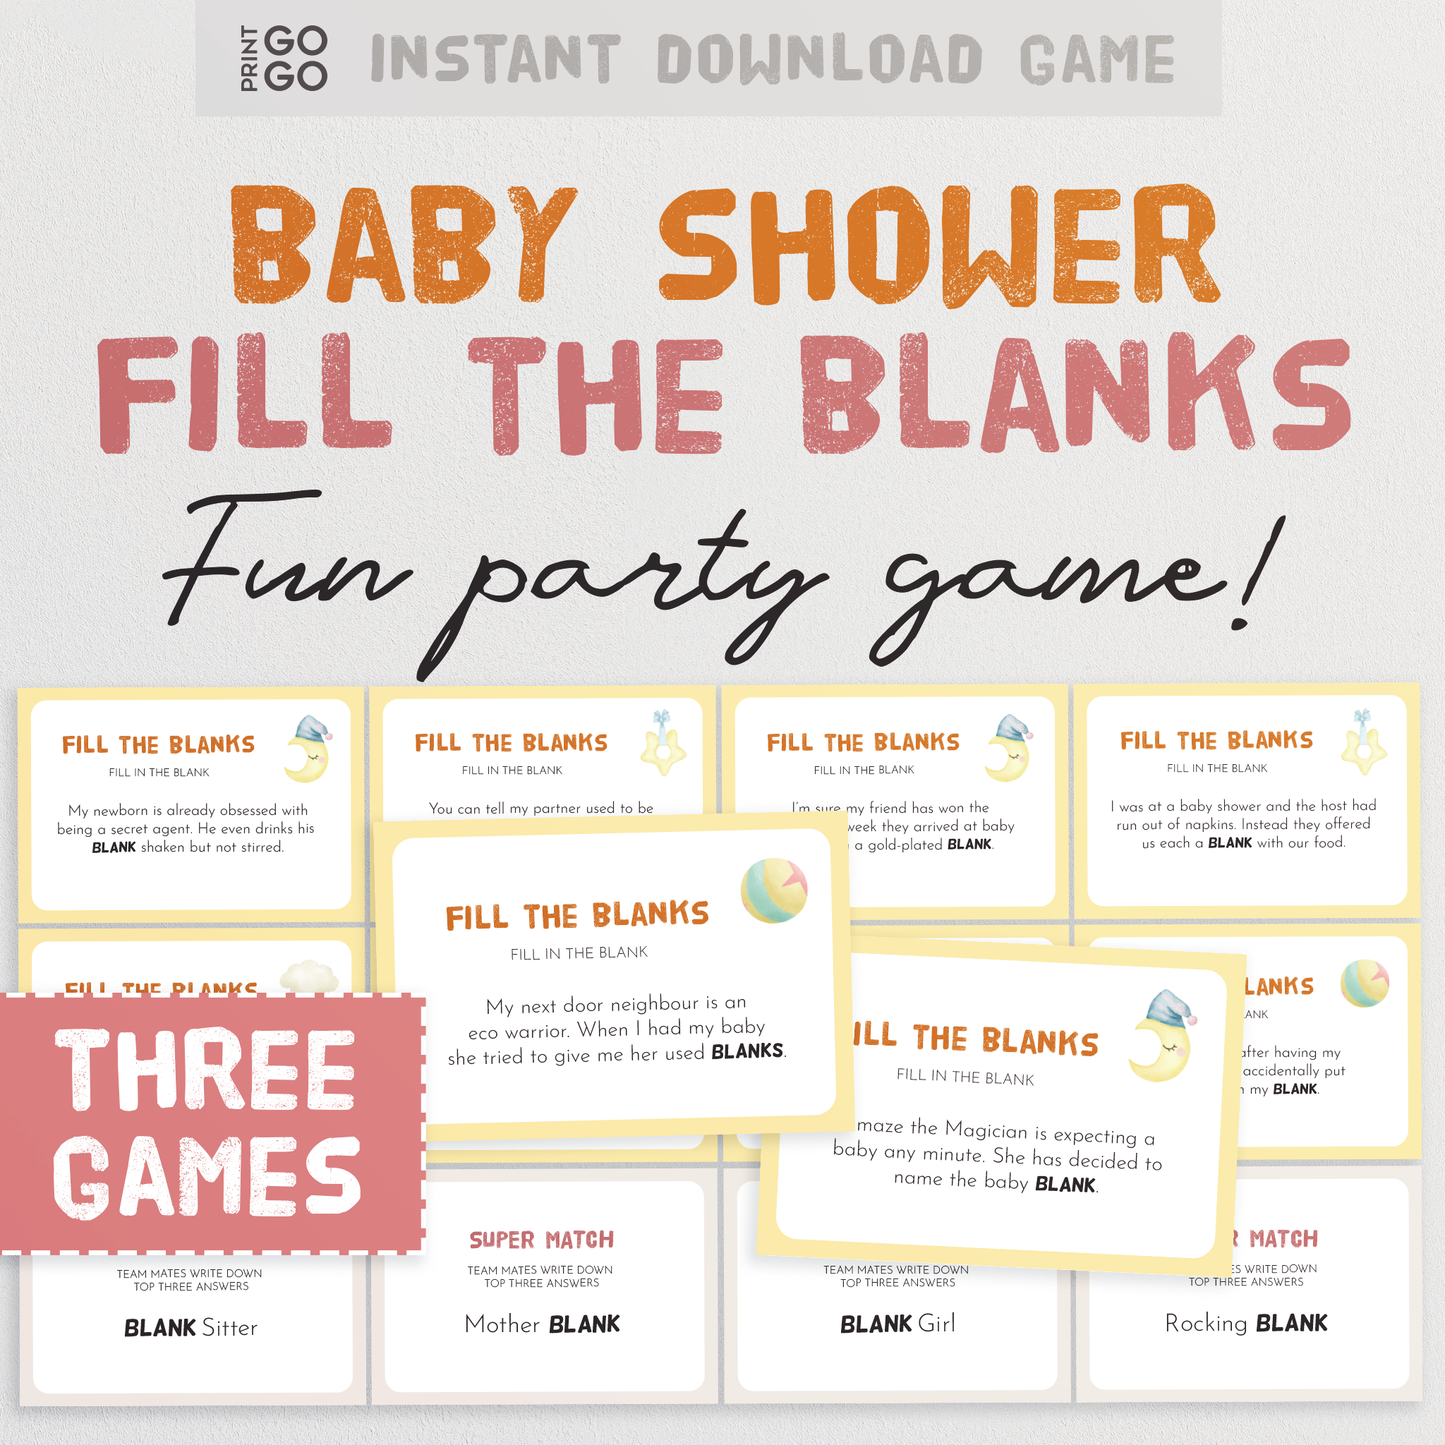 Baby Shower Fill The Blanks - The Hilarious Party Game of Completing Missing Words!